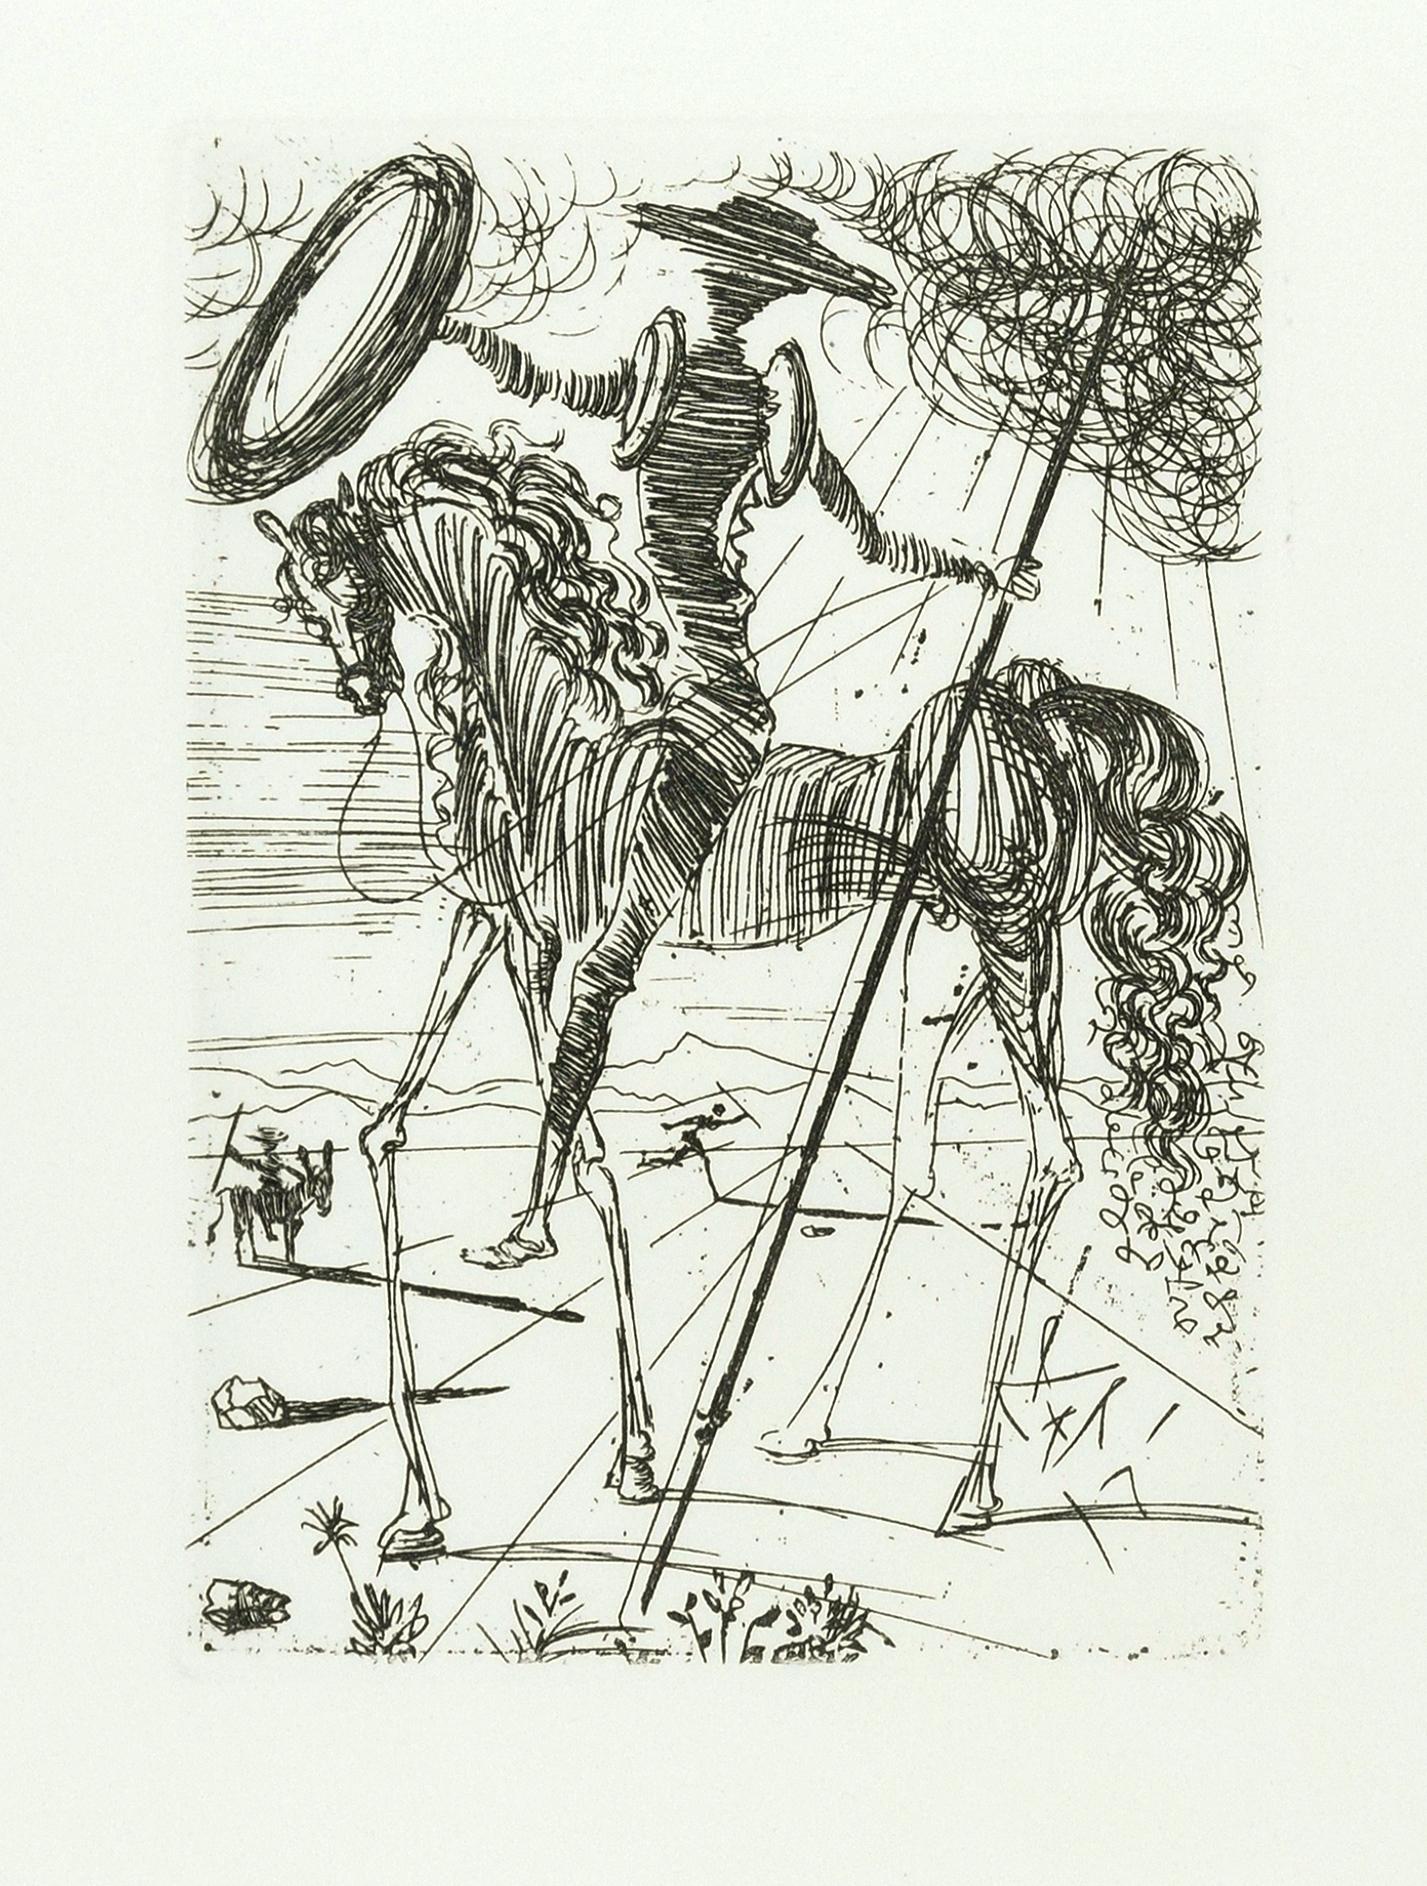 Salvador Dalí Abstract Print - "Don Quichotte" - Original Etching by S. Dalì - 1966